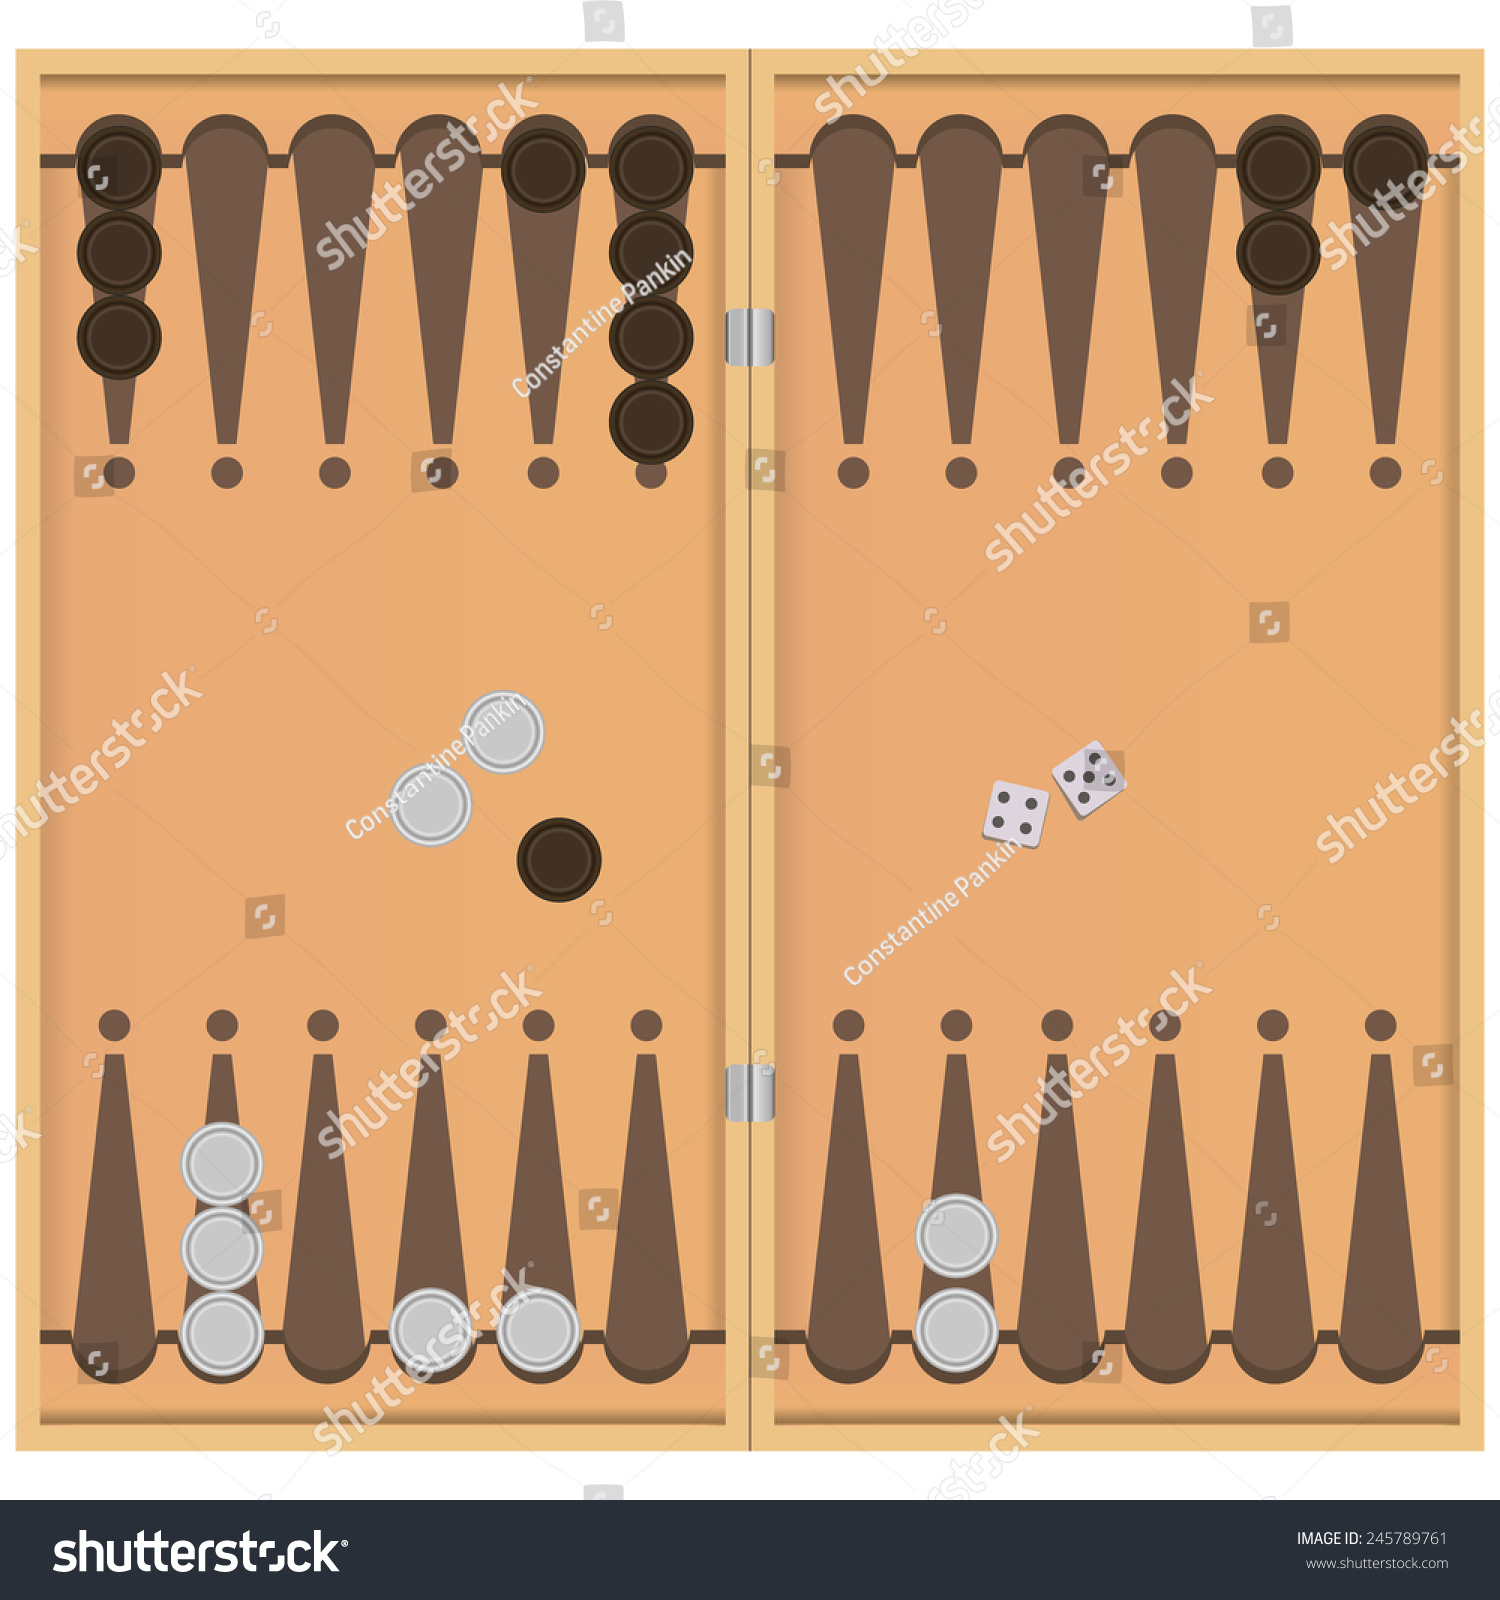 SVG of Backgammon on the wooden box, two dice and chips for the game. Vector illustration. svg